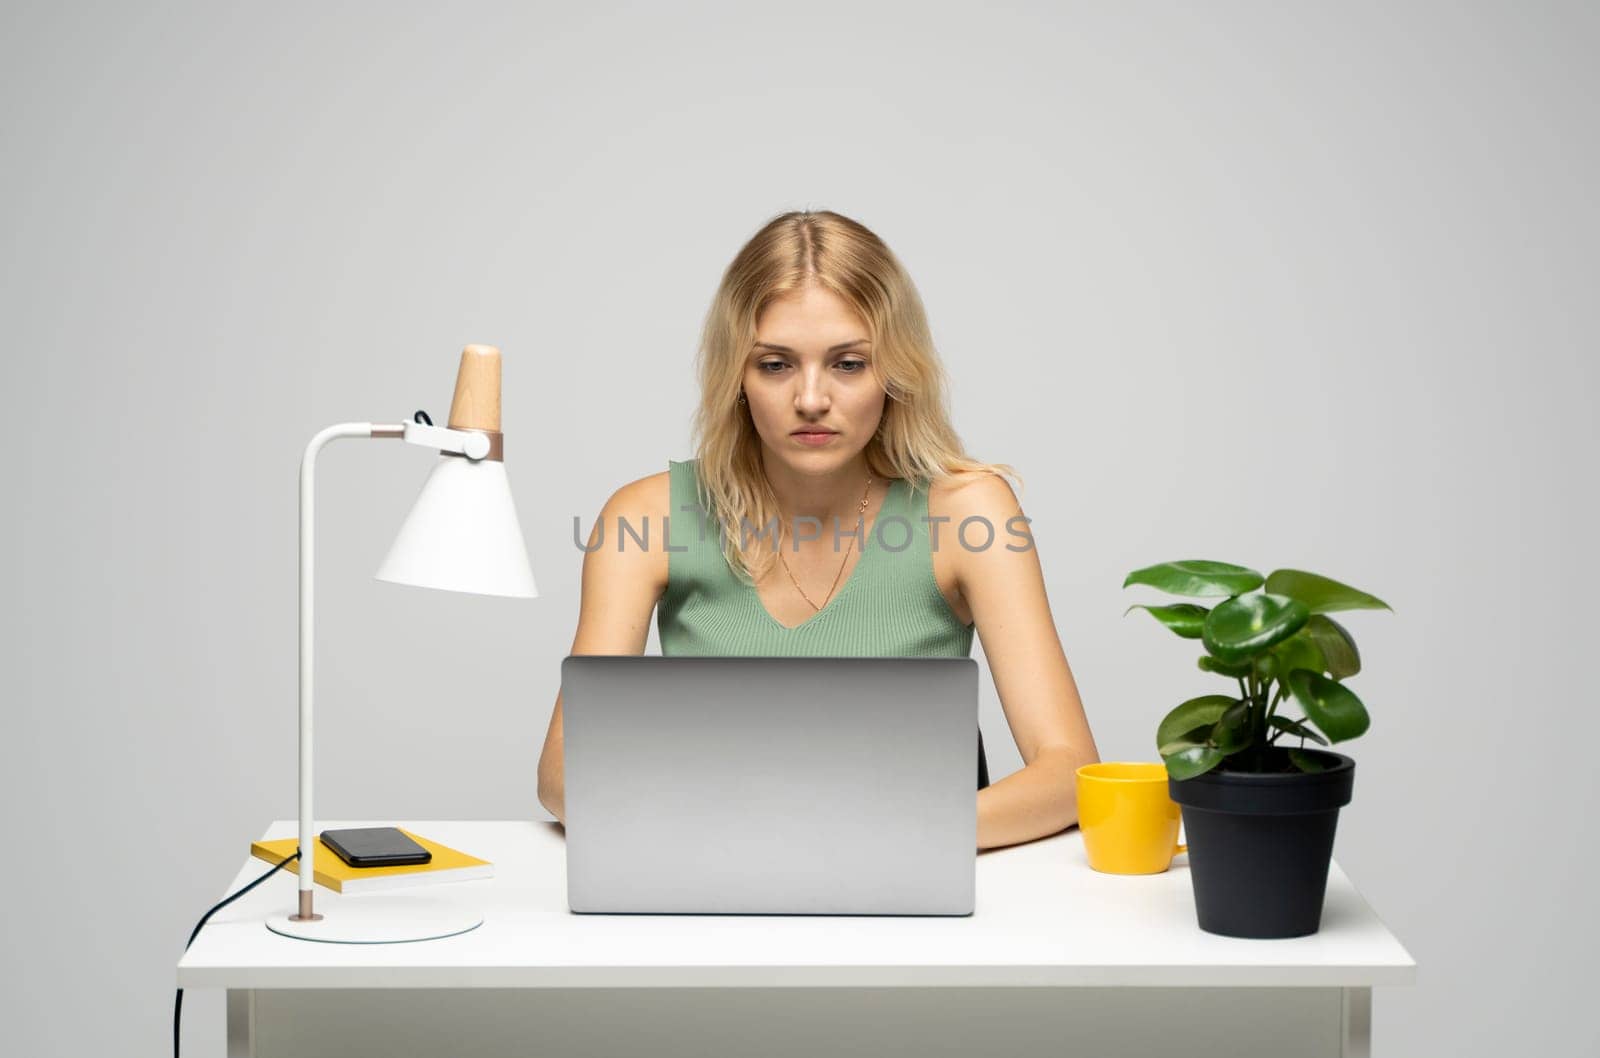 Smiling business woman working with a laptop isolated on a grey background. Portrait of a pretty young woman studying while sitting at the table with grey laptop computer, notebook.